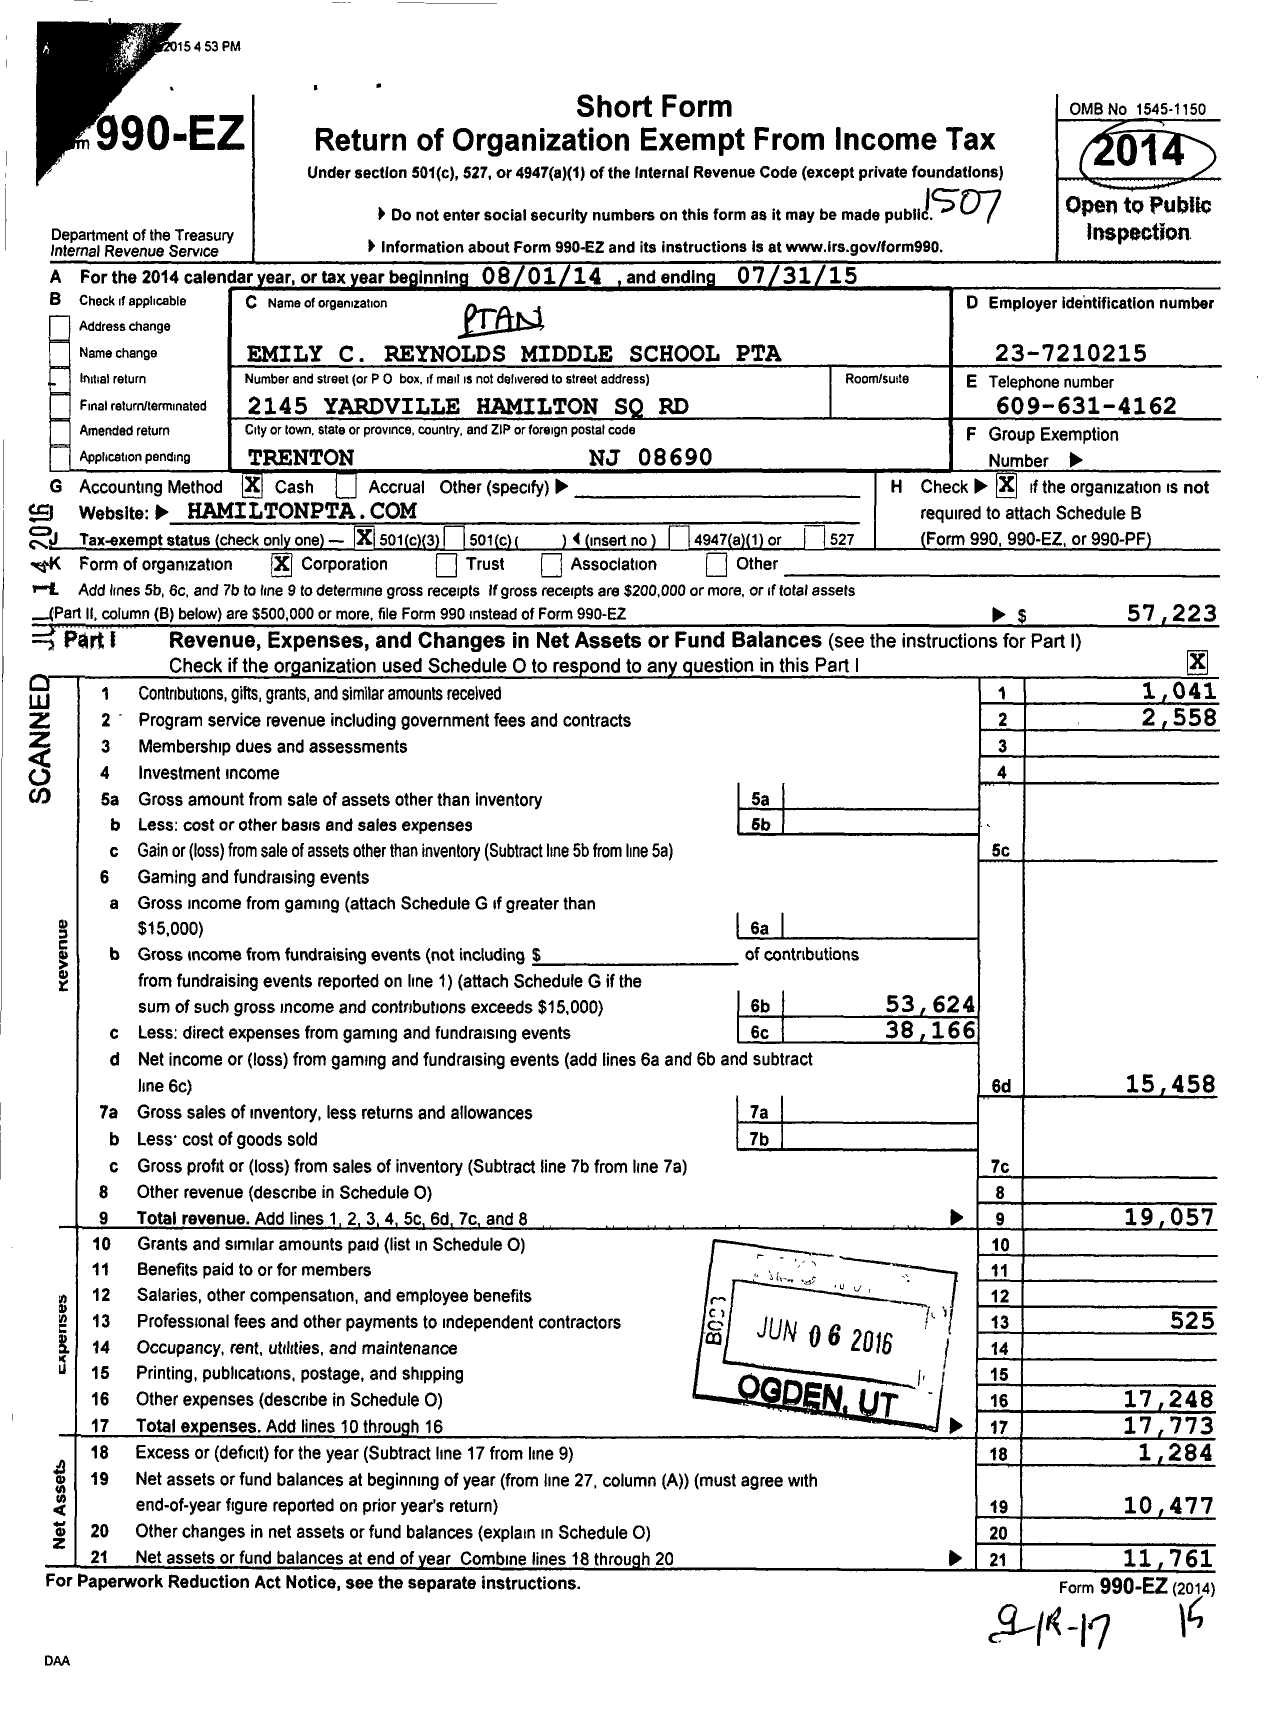 Image of first page of 2014 Form 990EZ for New Jersey PTA - Emily C Reynolds Middle School PTA